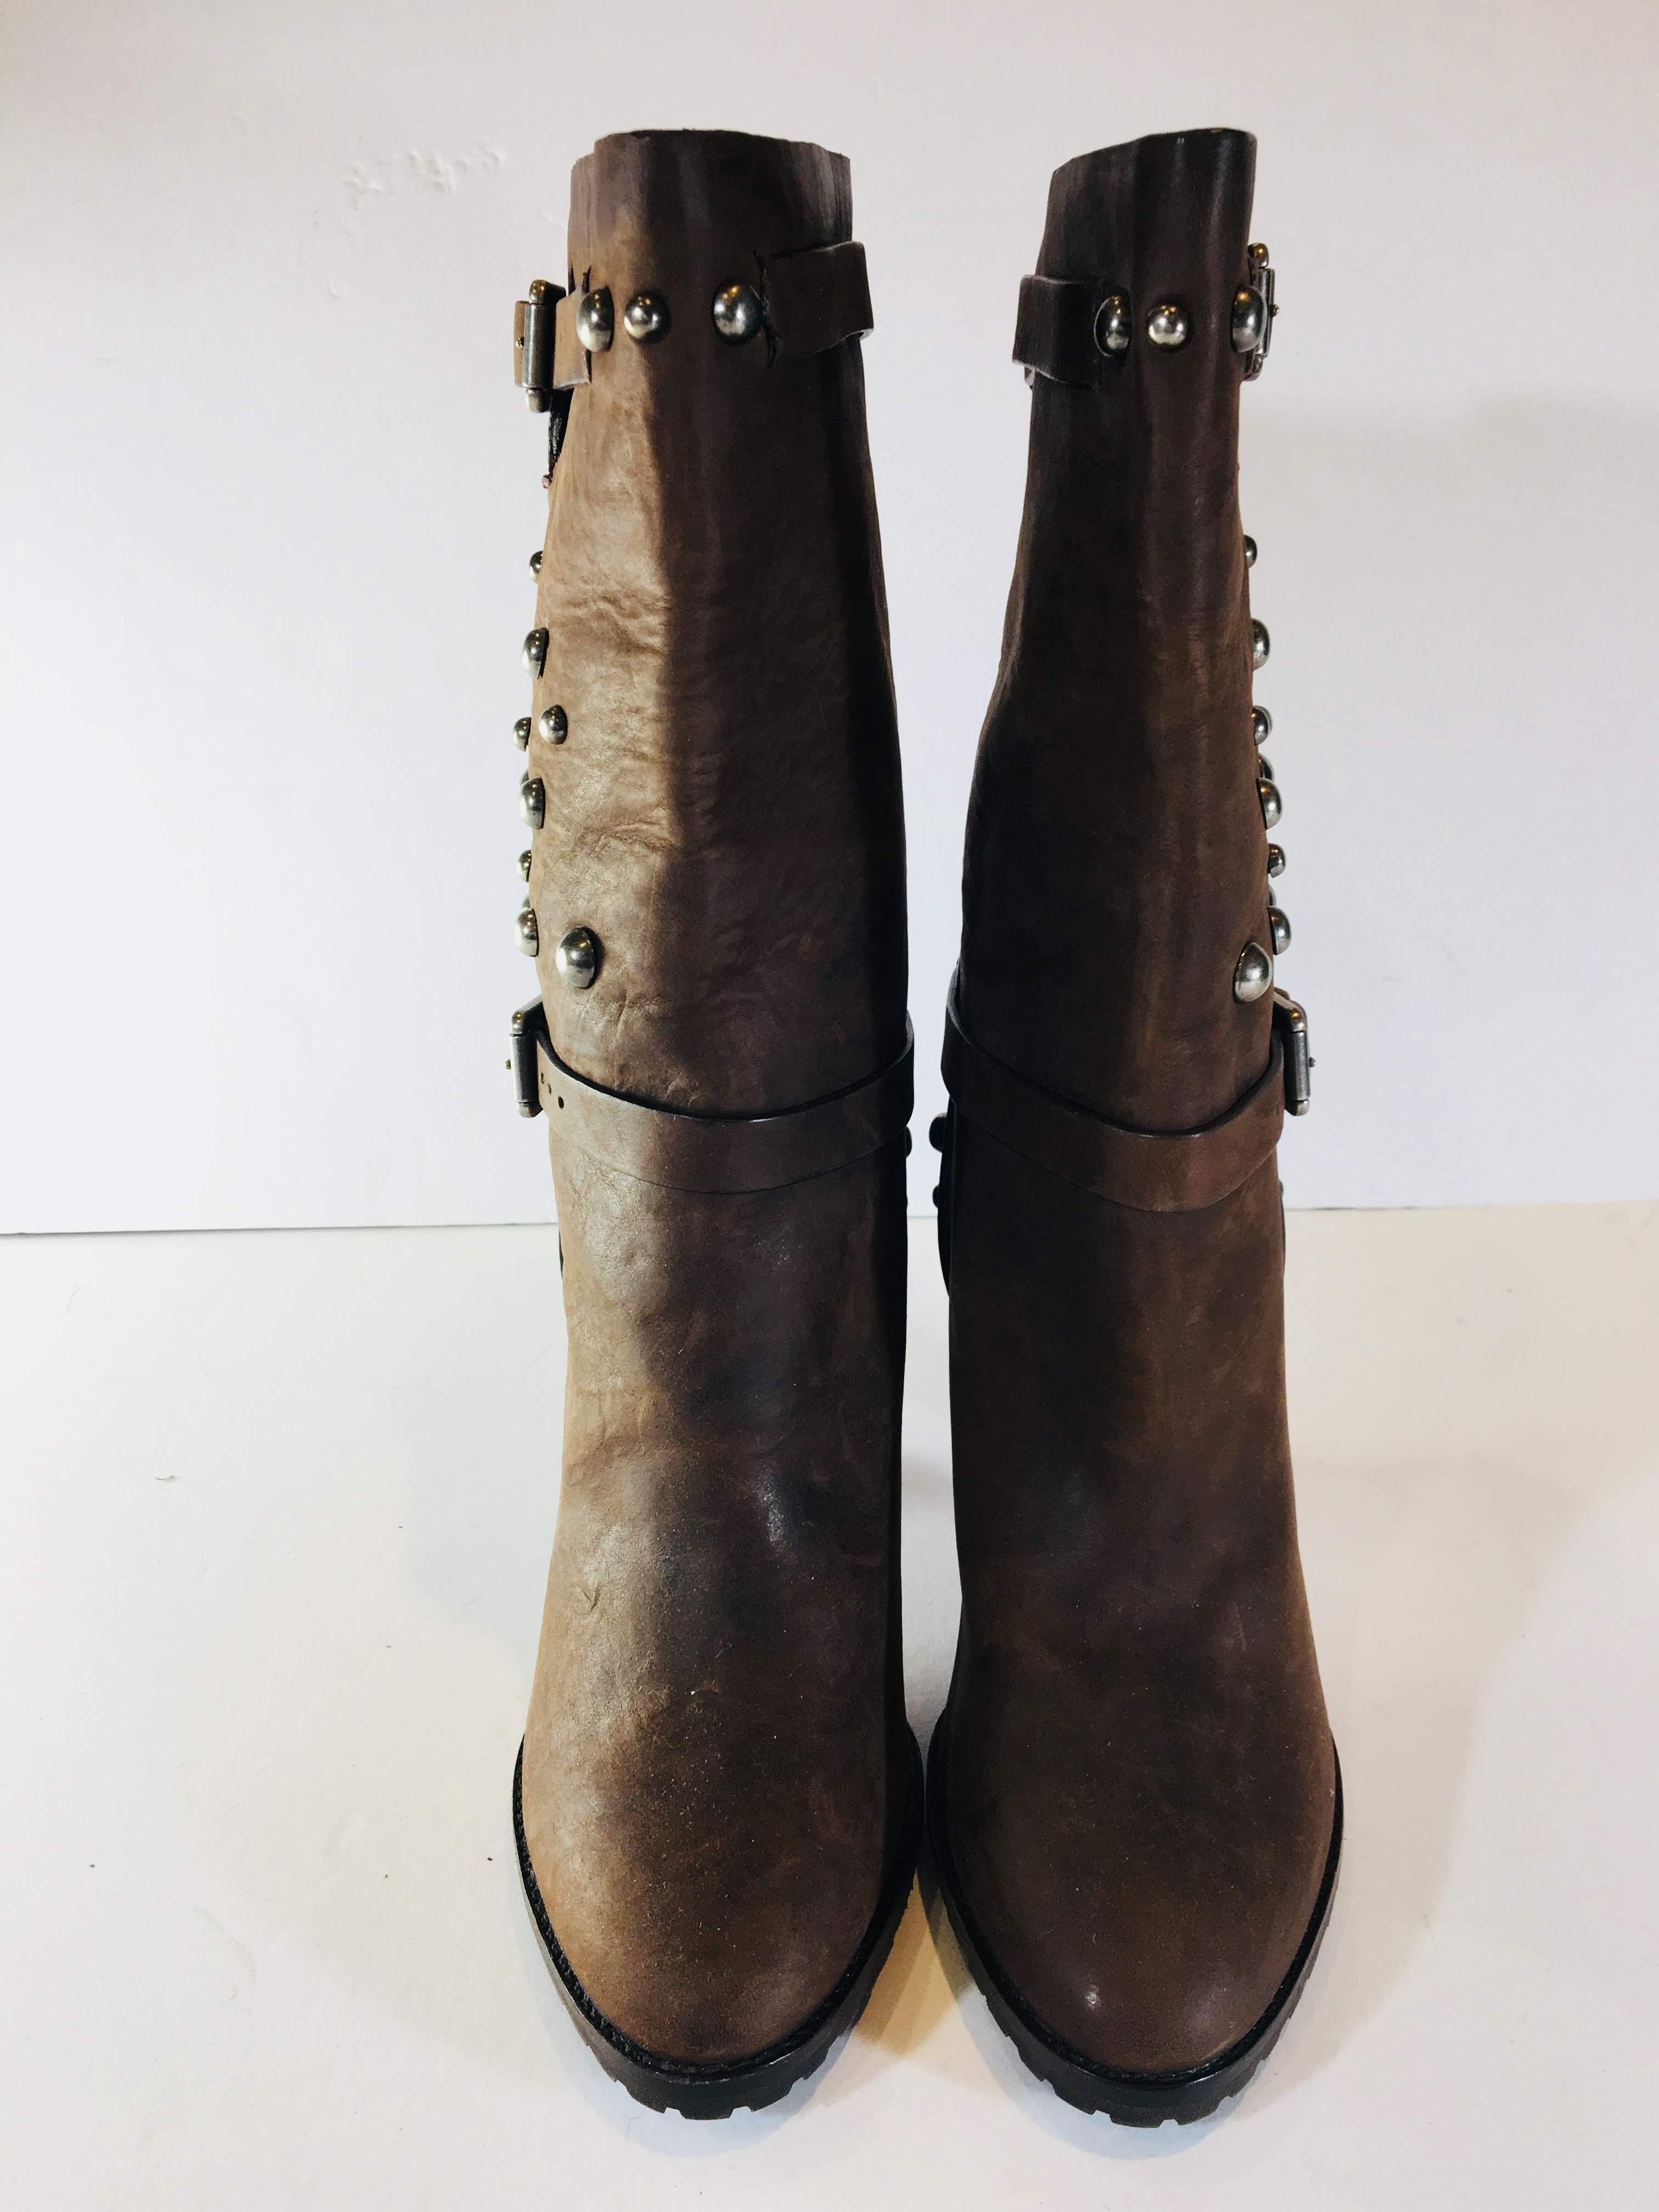 Ralph Lauren Purple Label Size 8 Brown Leather High Heel Mid Calf Studded Boots